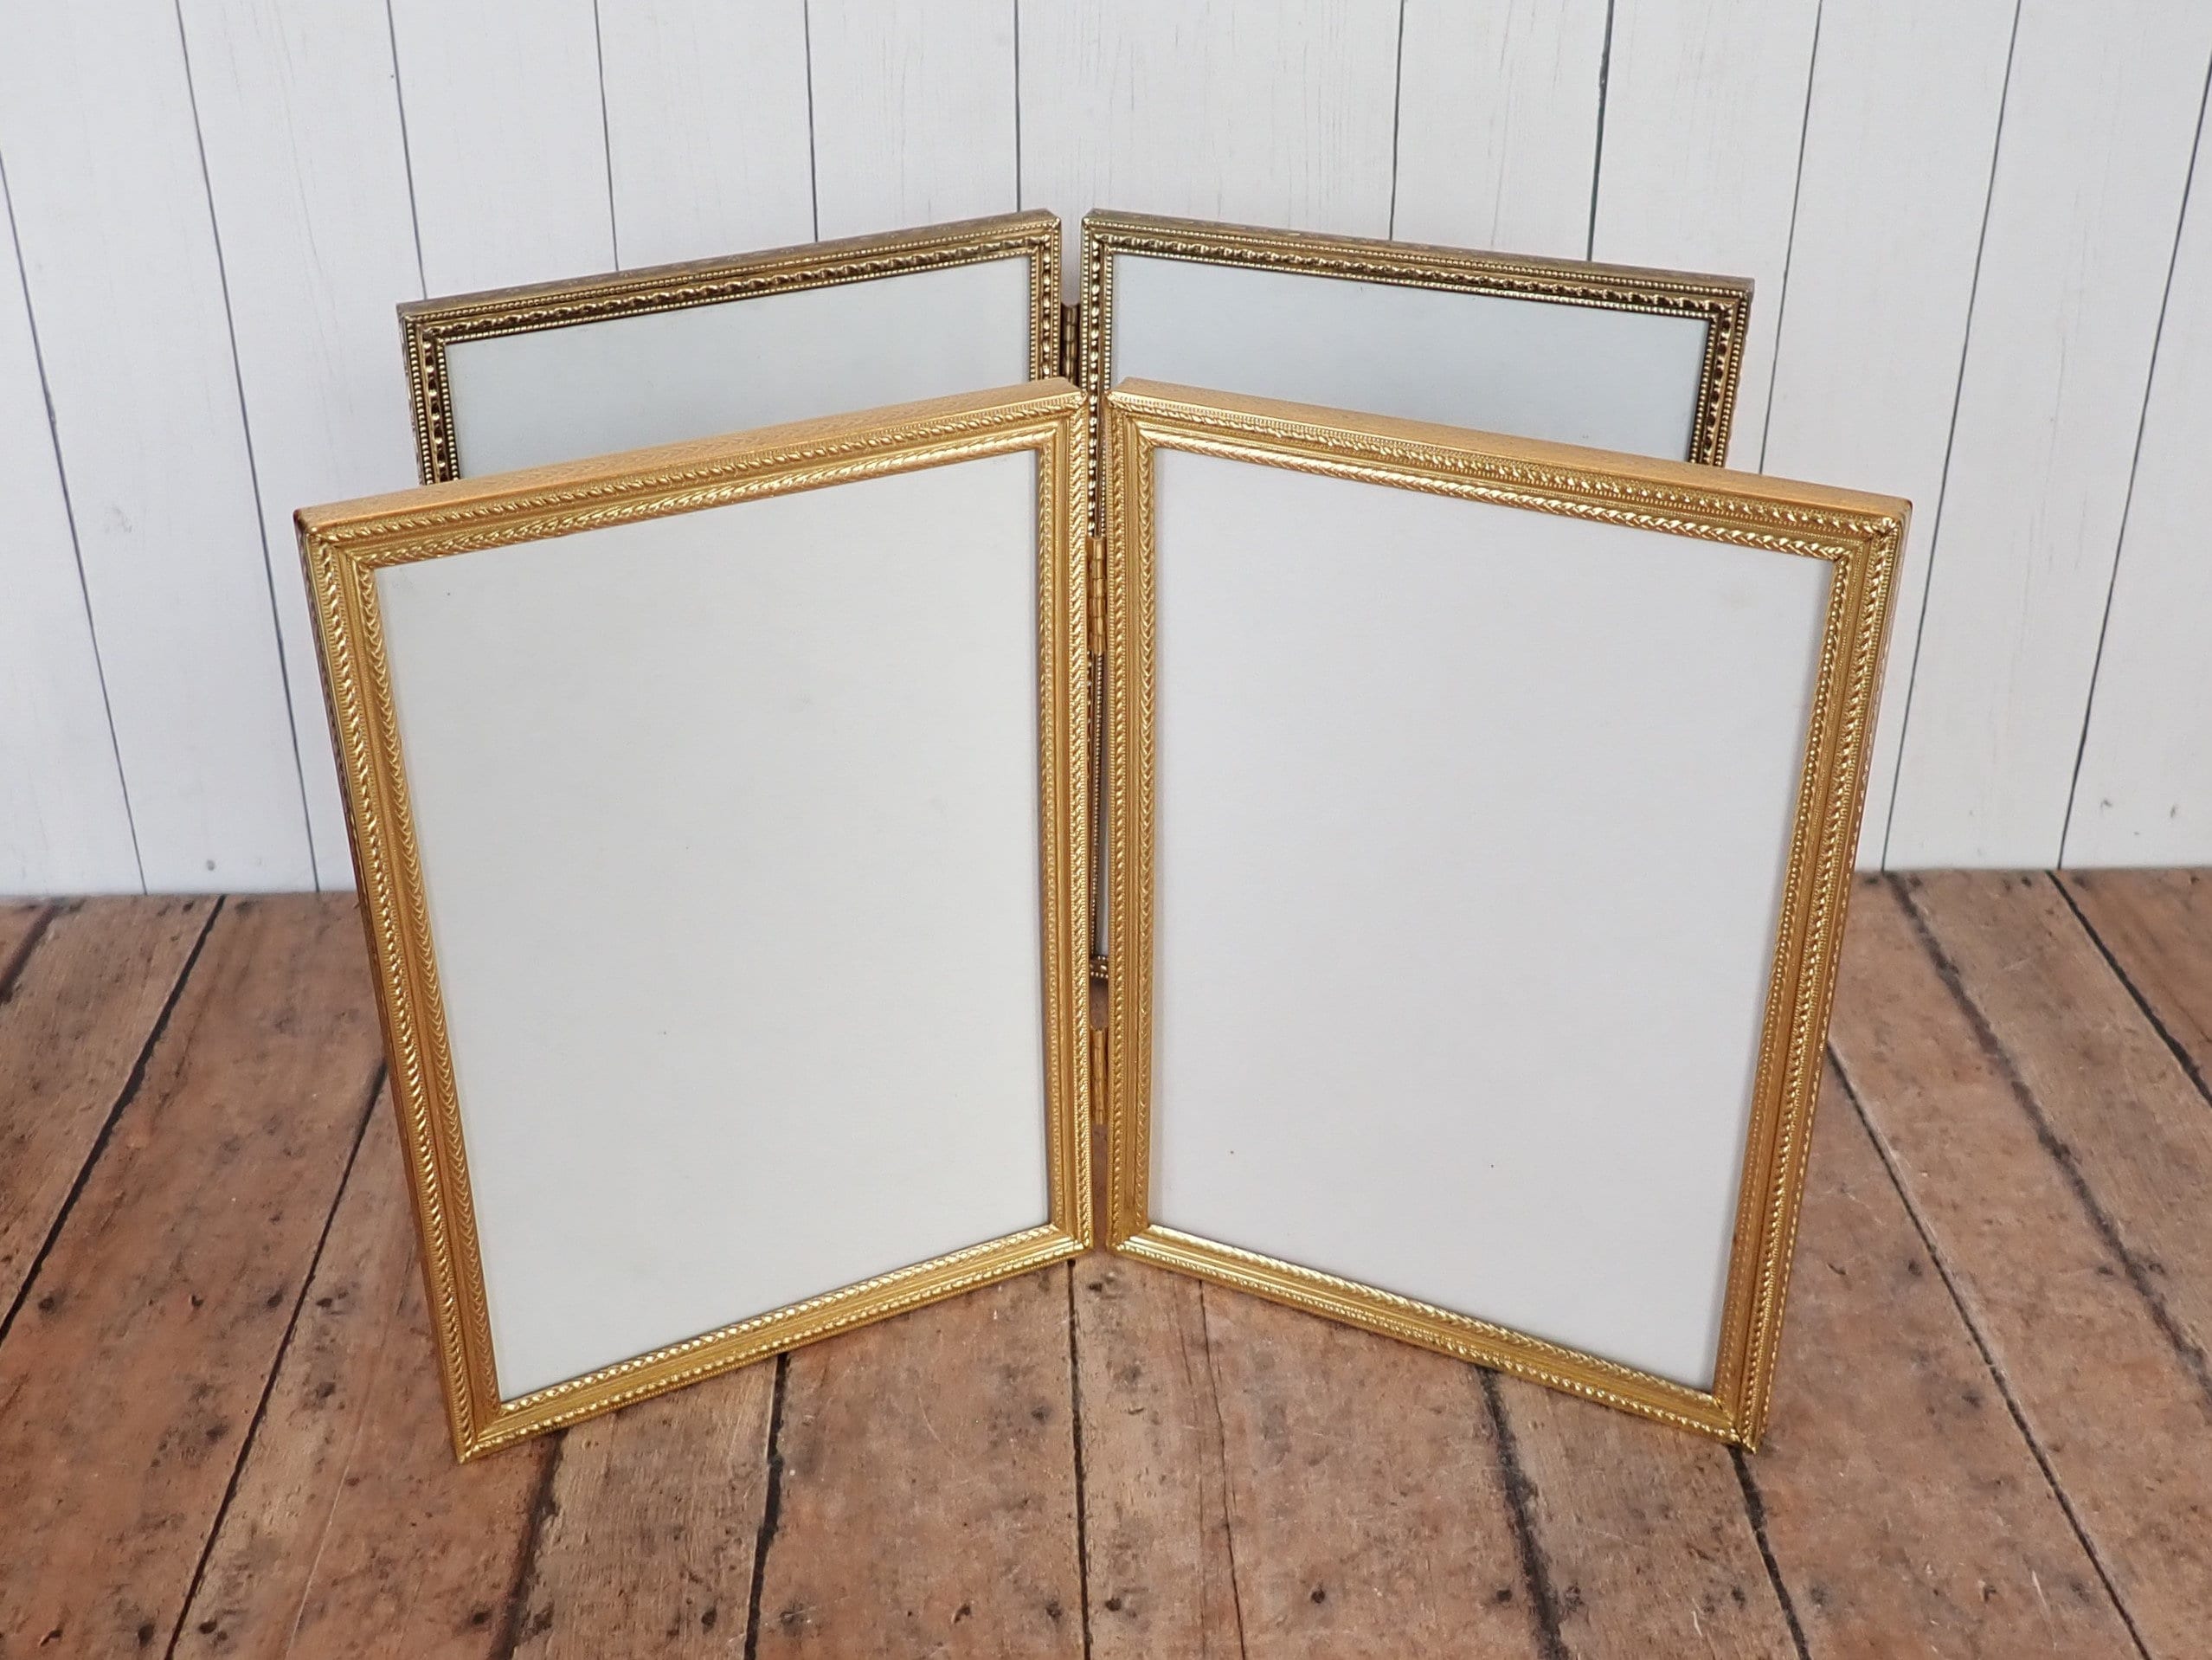 Vintage 5x7 Double Hinged Bi Fold Metal Gold Brass Photo Picture Frame